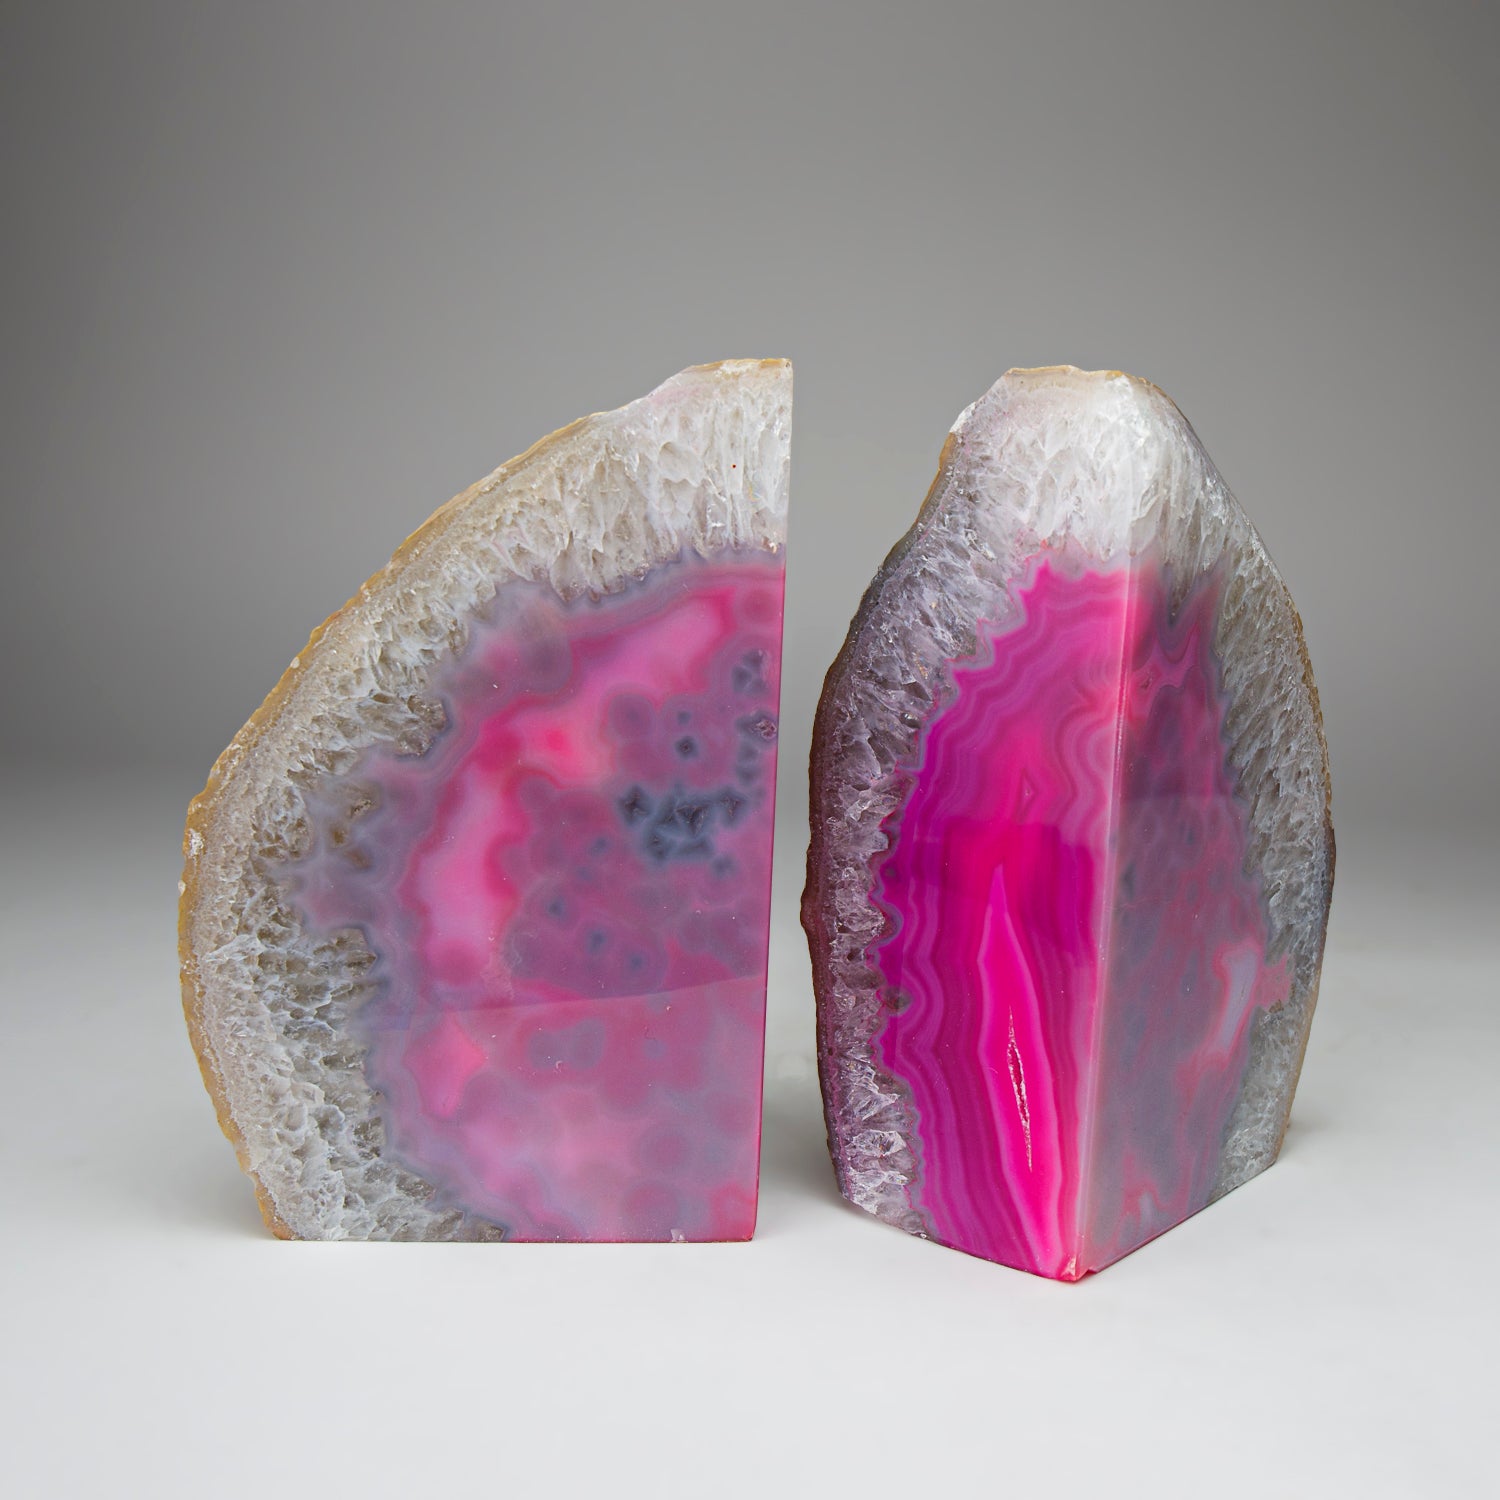 Genuine Quartz with Pink Agate Bookends from Brazil (7.4 lbs)